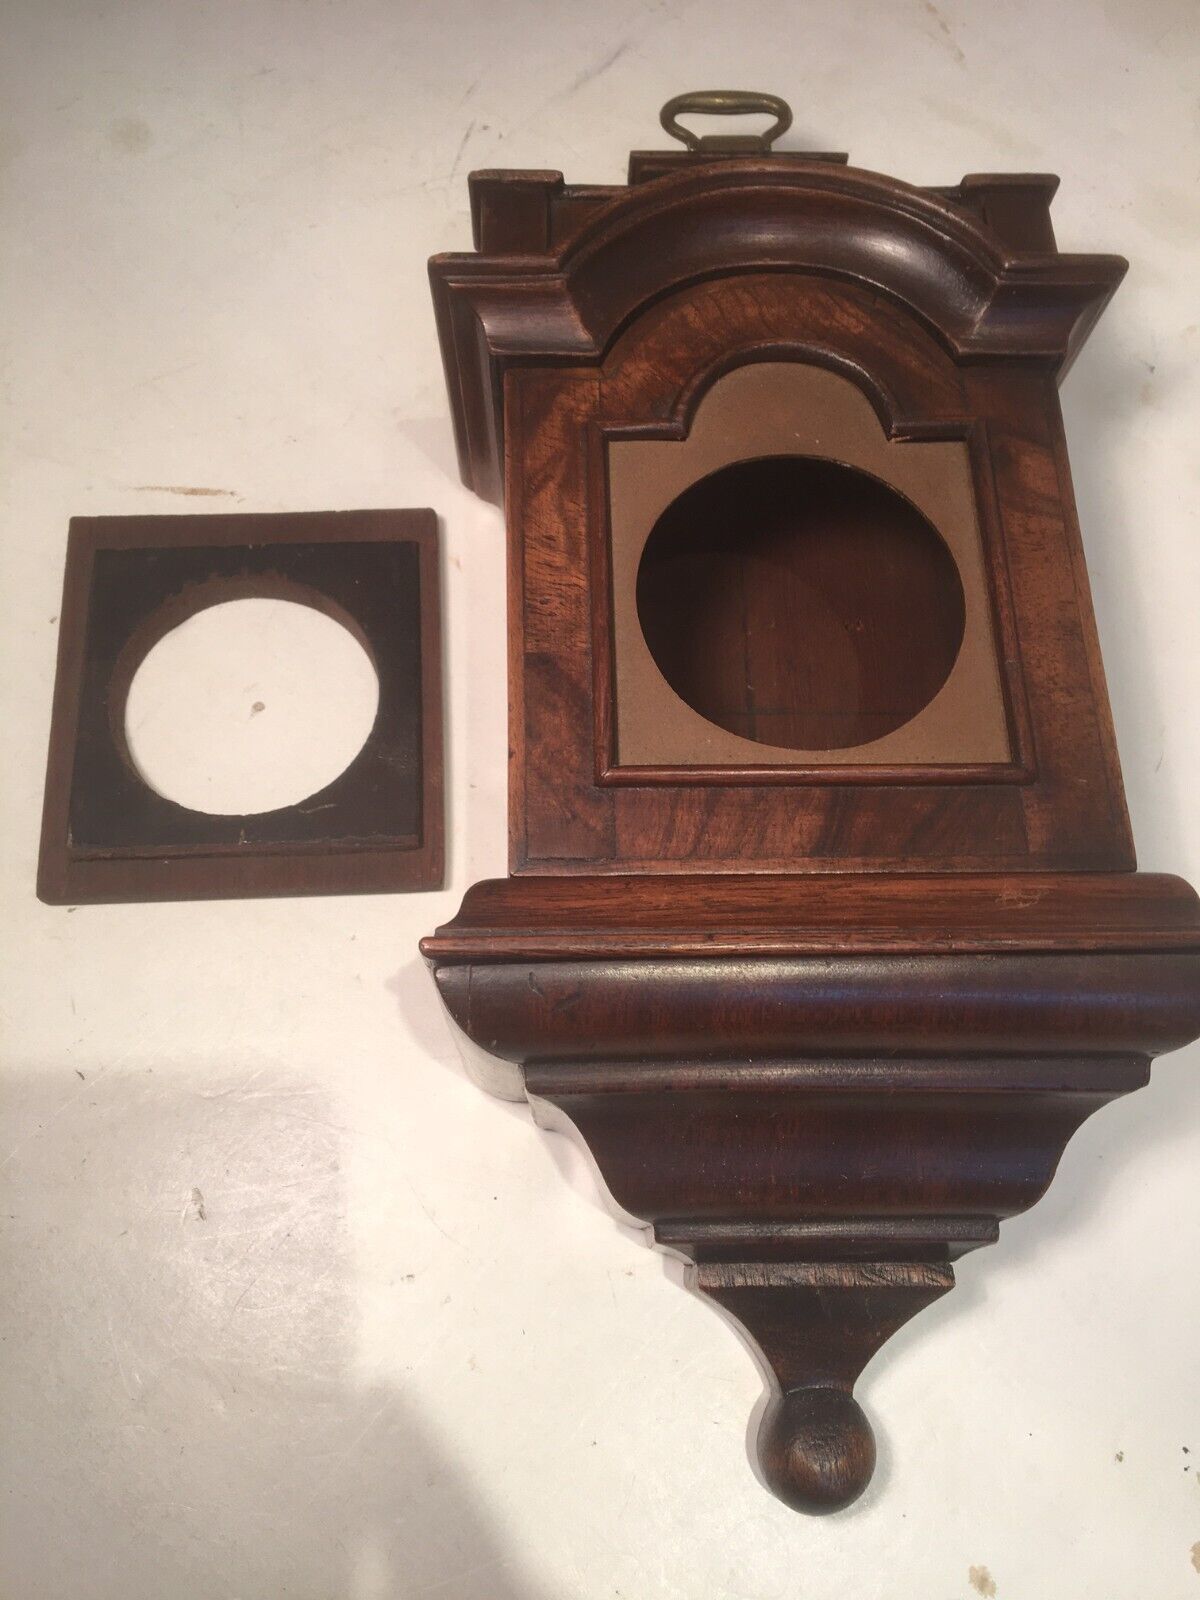 ANTIQUE VERY FINE EARLY WOOD WALL BRACKET CLOCK CASE ENGLISH- AMERICAN